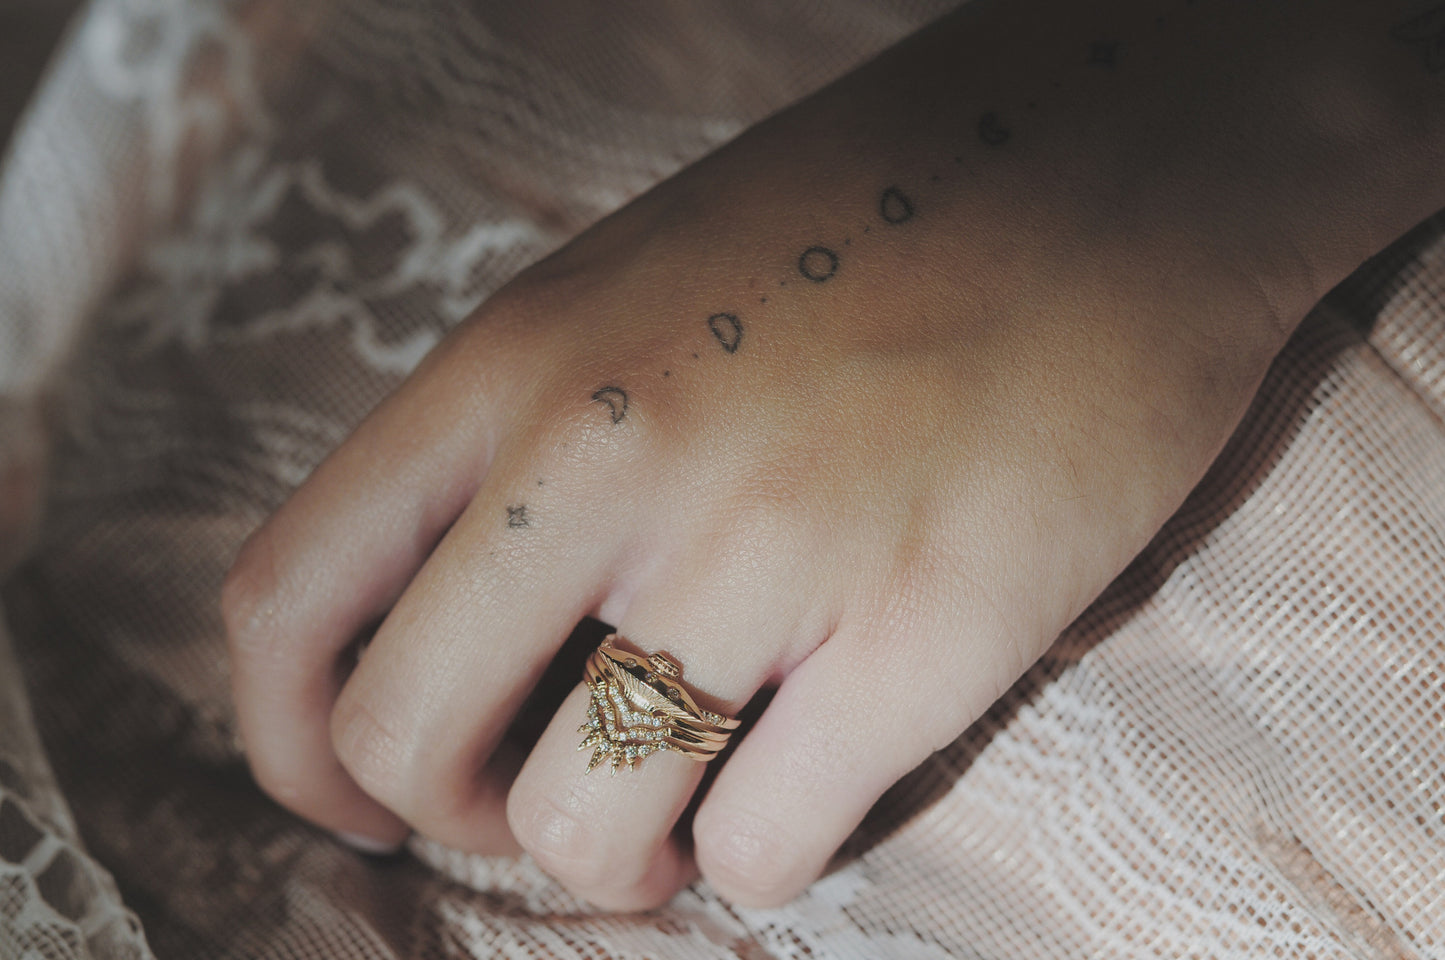 Orion Ring